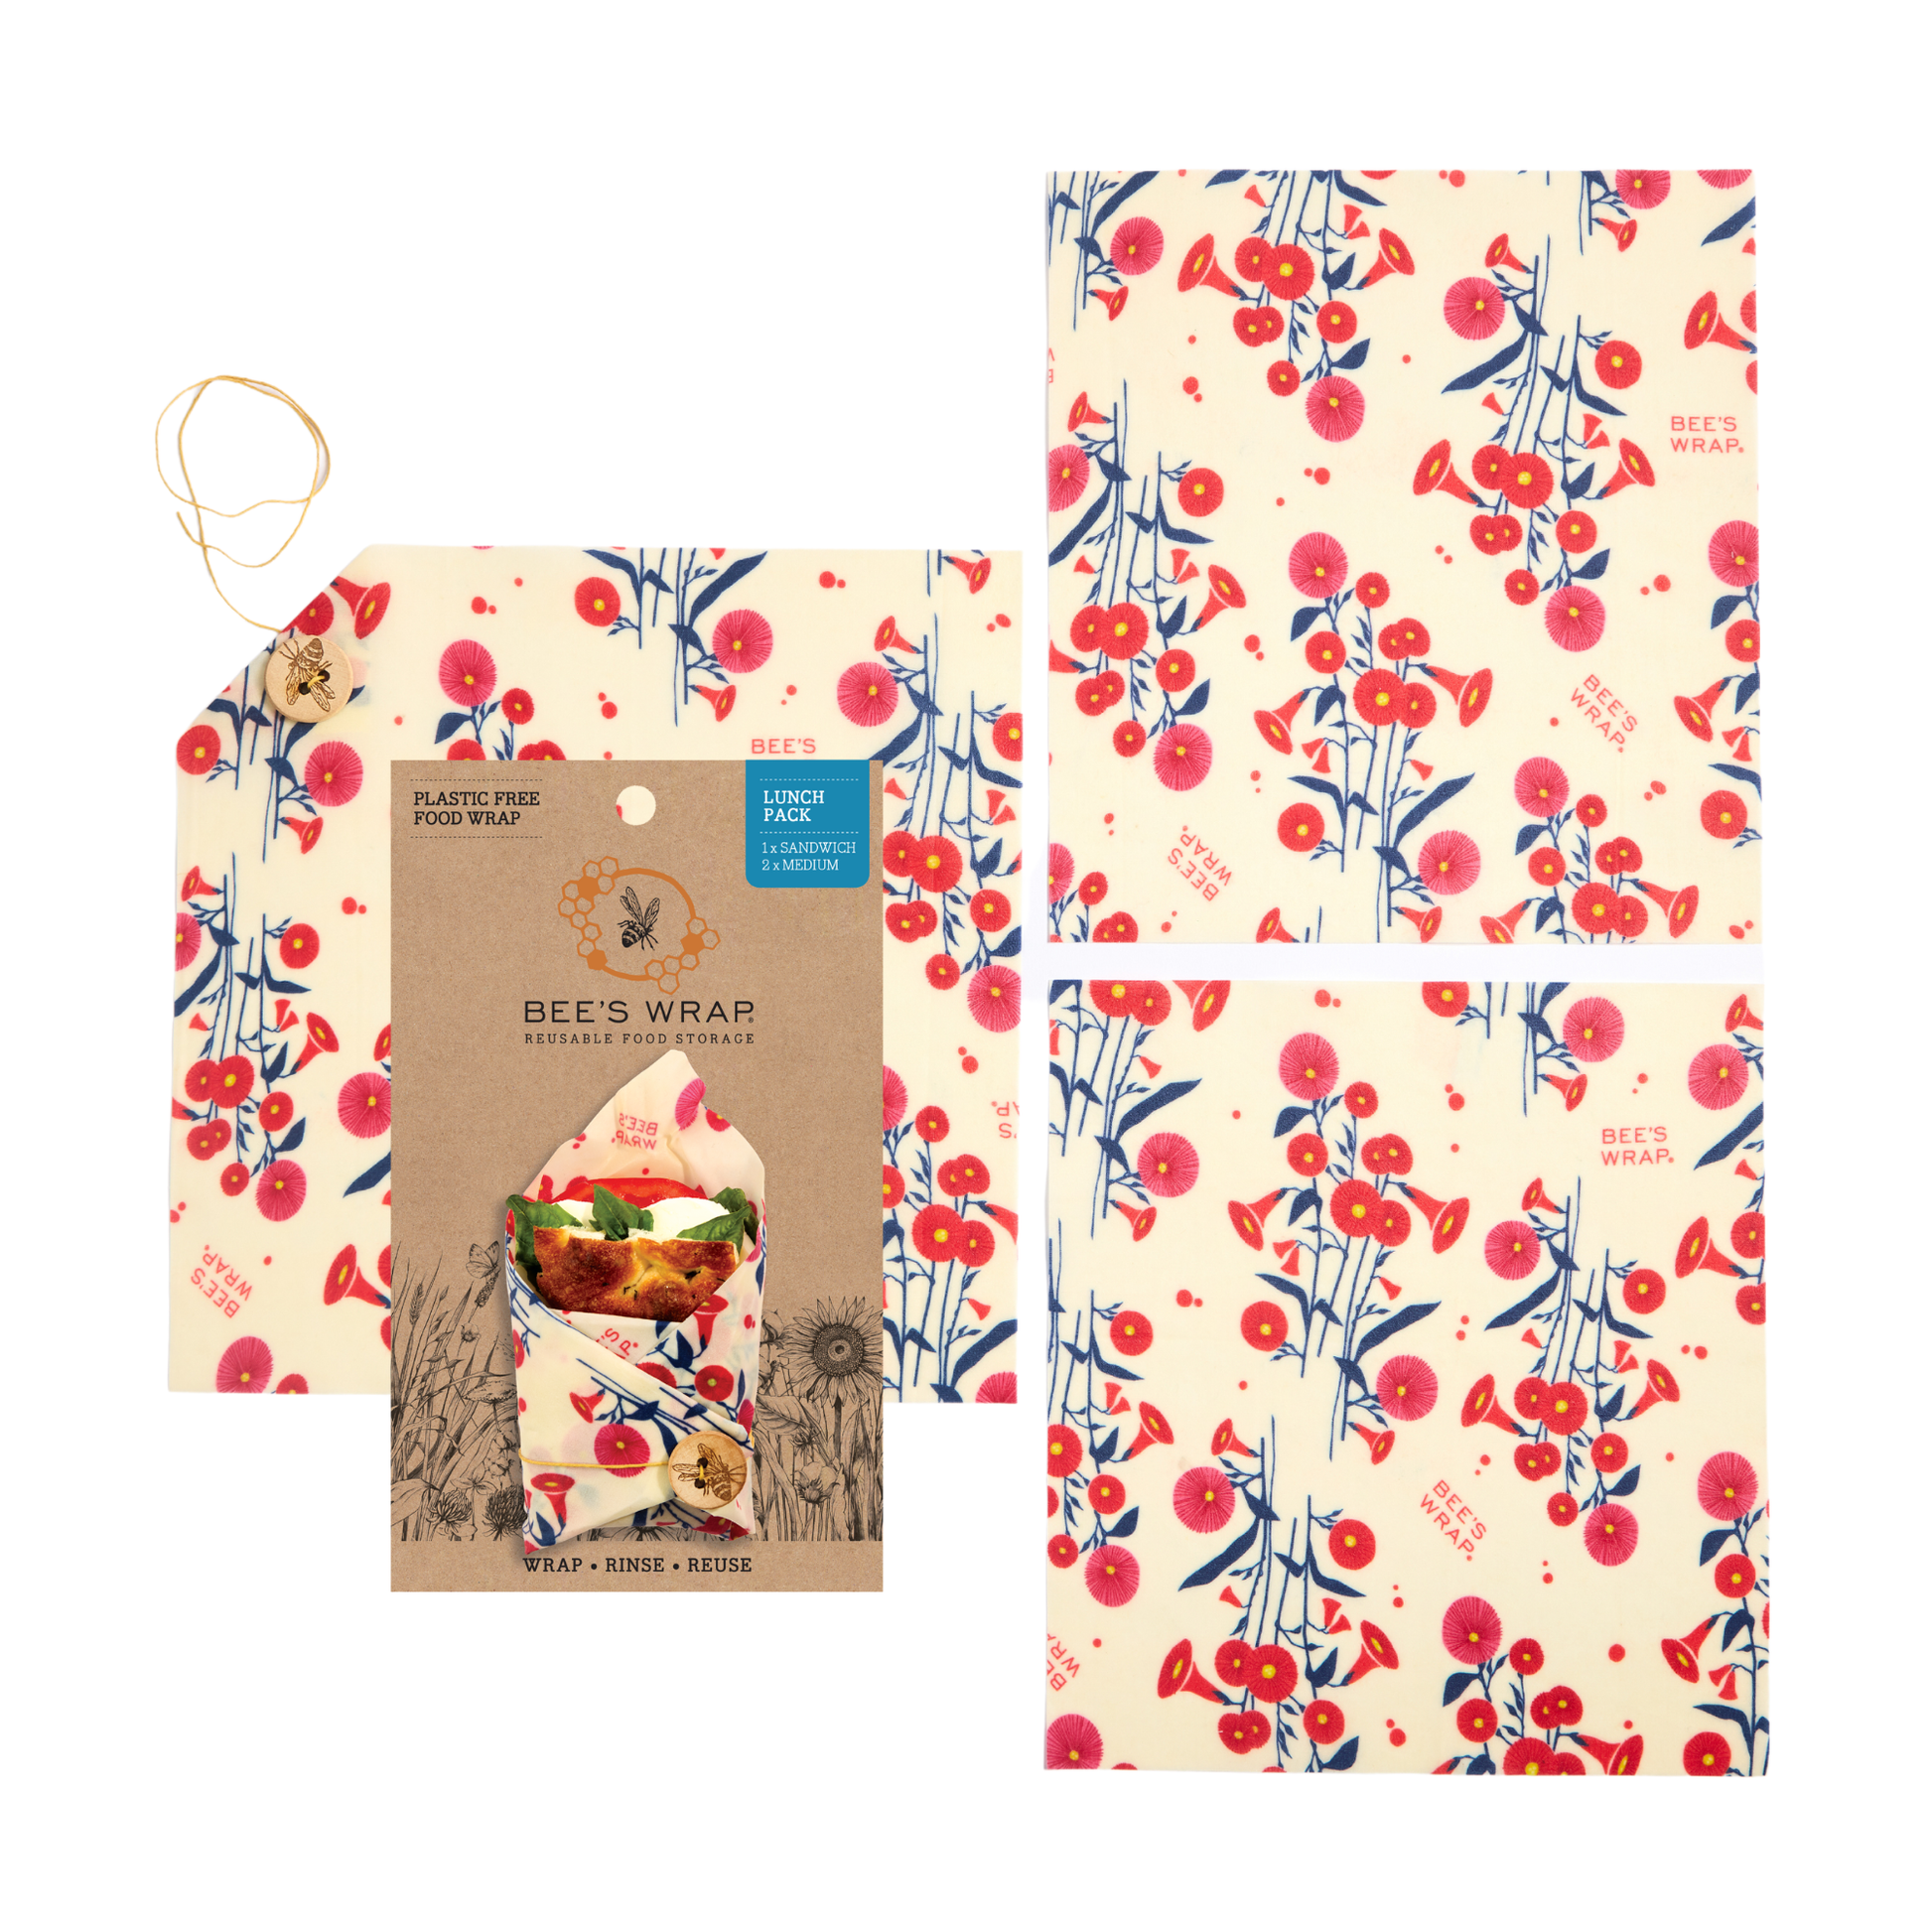 Bee's Wrap - New! The Lunch Pack - Full Bloom Bee's Wrap